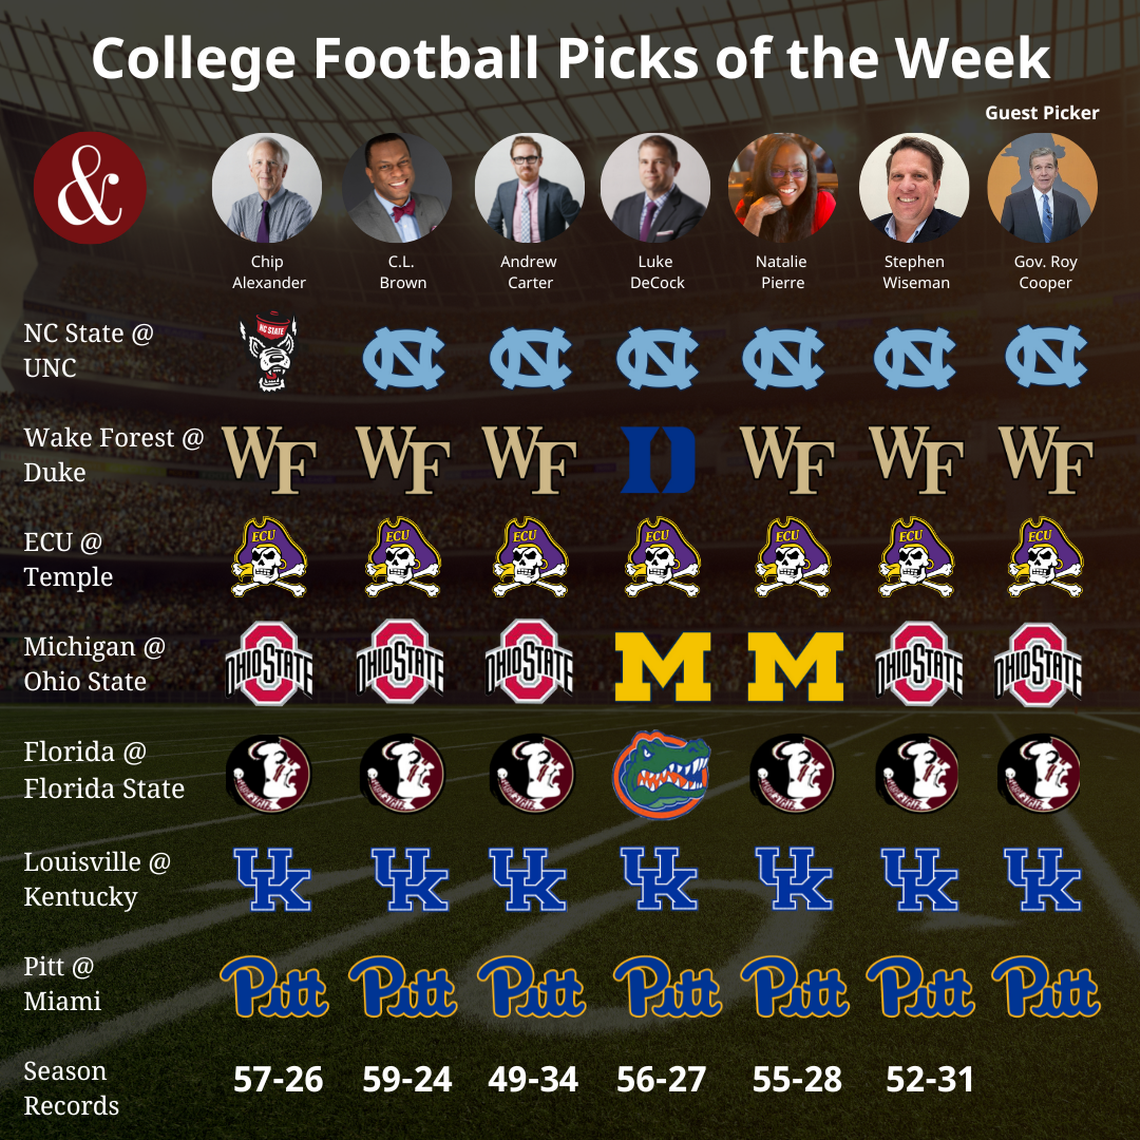 News & Observer sports staff picks games for Week 13 of the college football season. North Carolina Gov. Roy Cooper is this week’s guest picker.